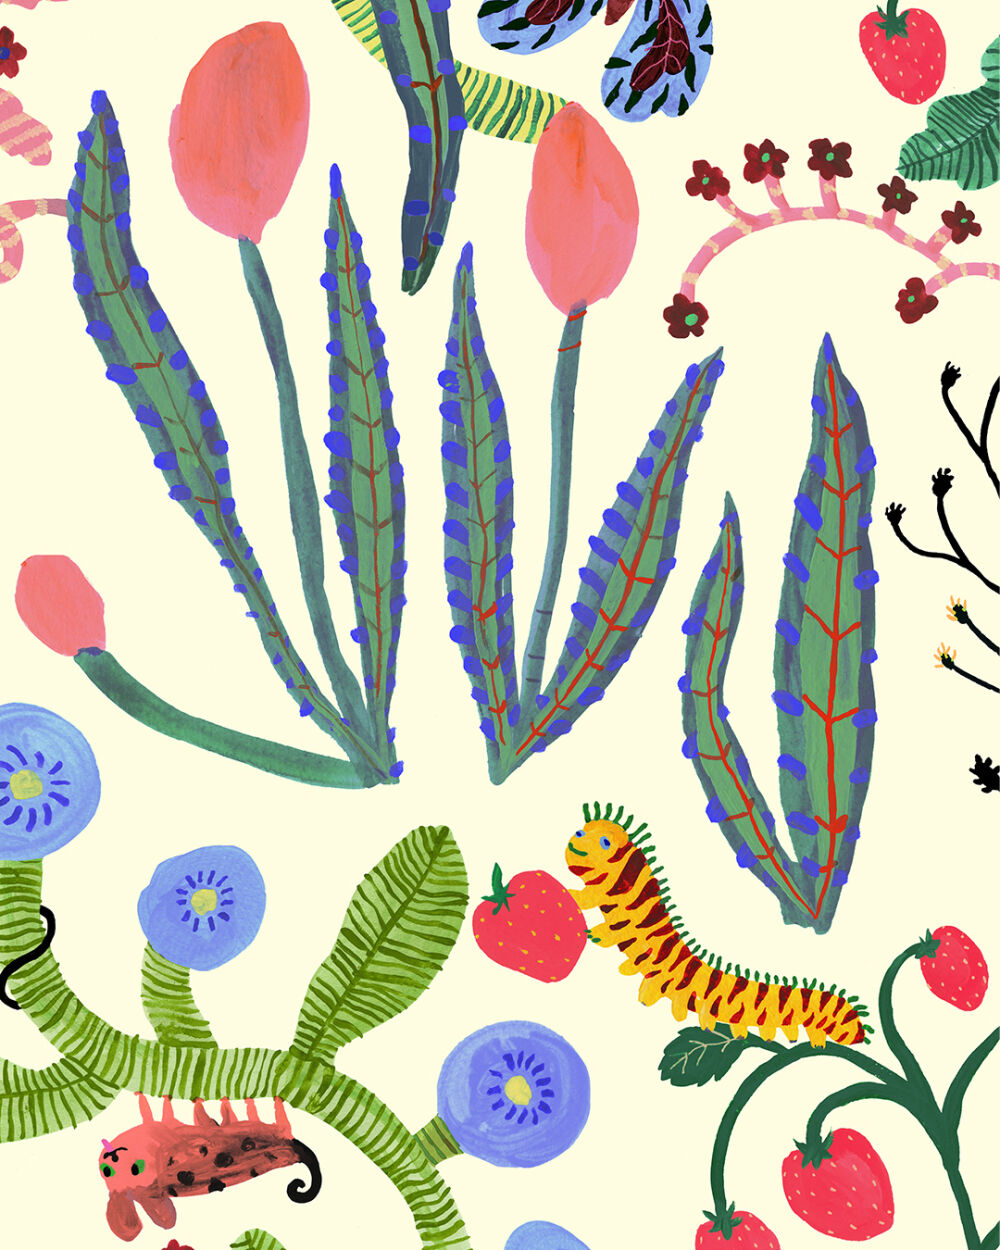 Botanical illustrated pattern and characters for Åhlens Gift Campaign by Yoyo Nasty